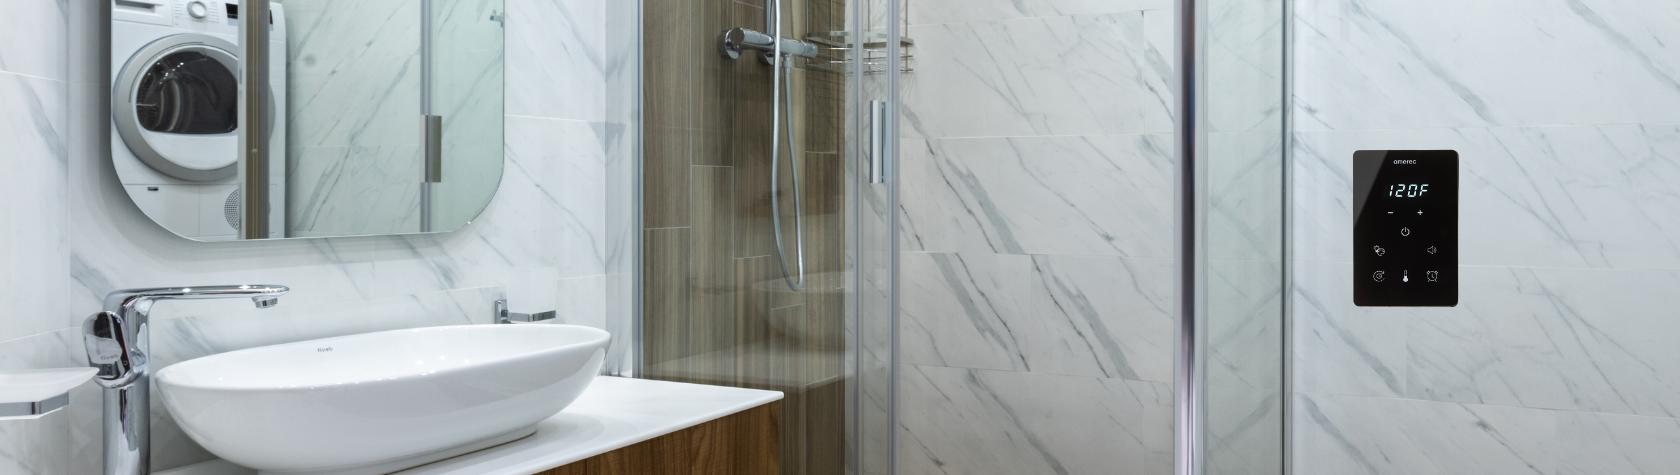 Choose a Control for Your Steam Shower